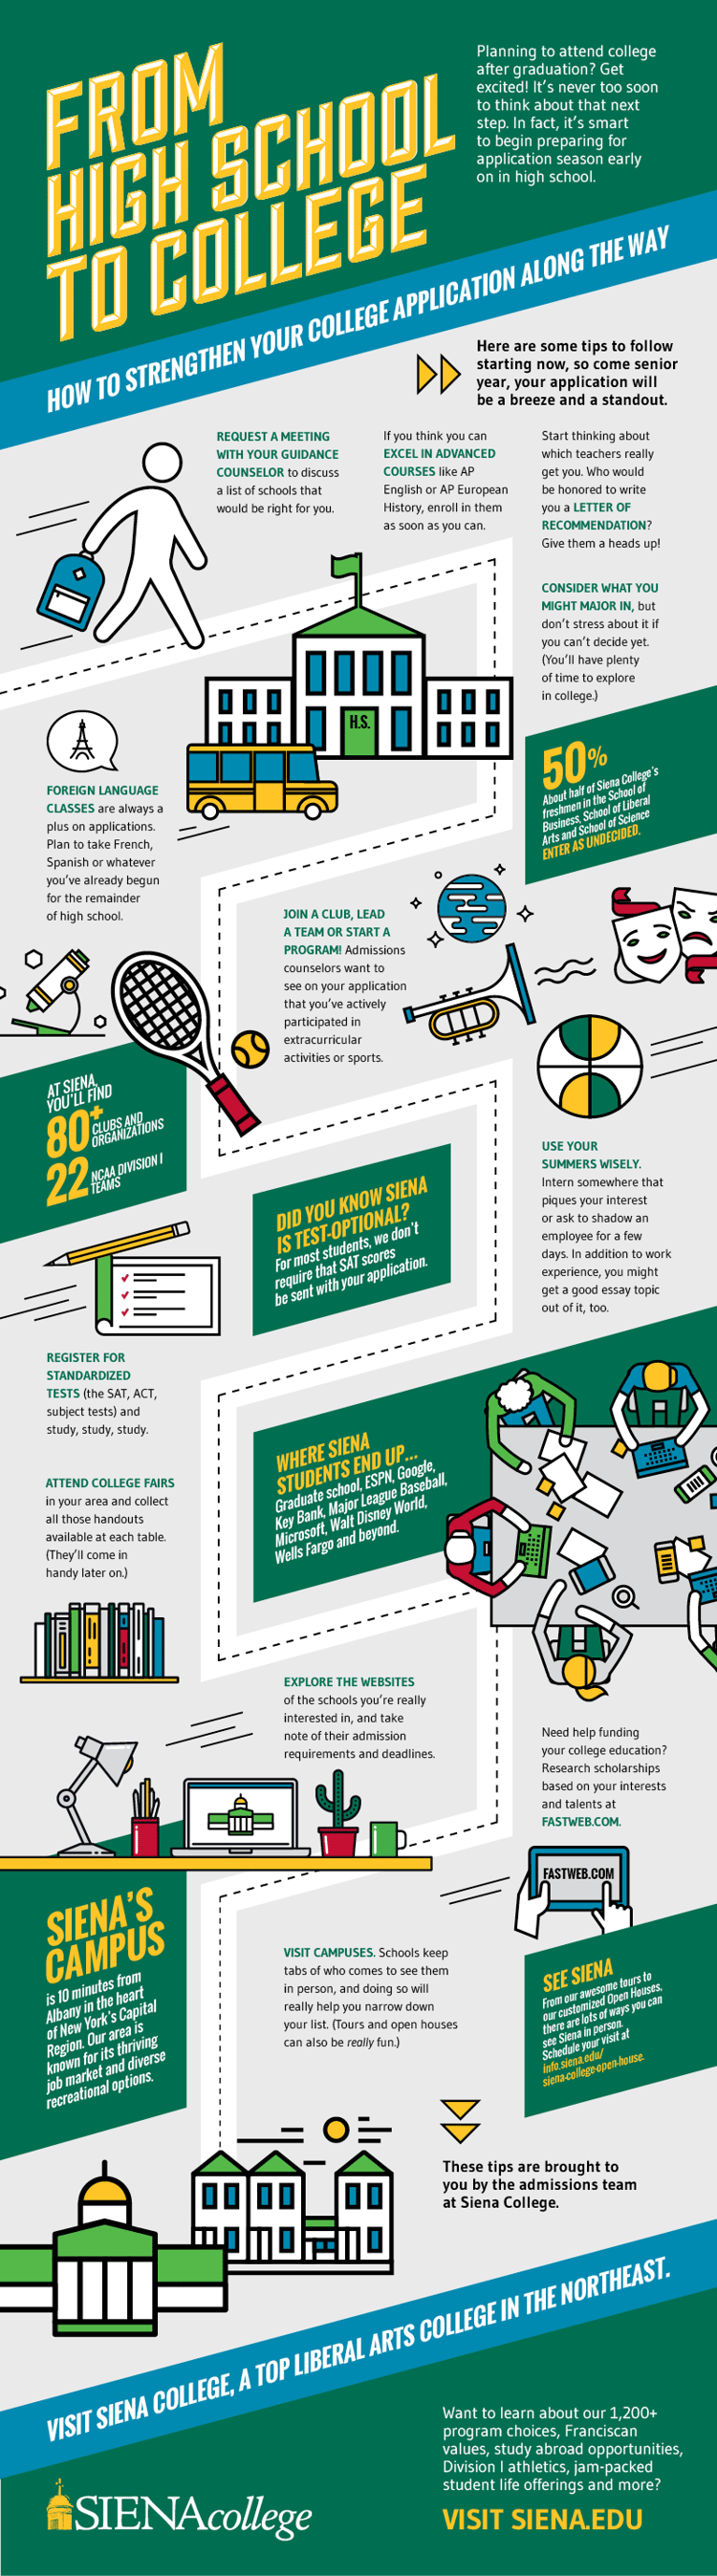 From High School to College - Sophomore infographic